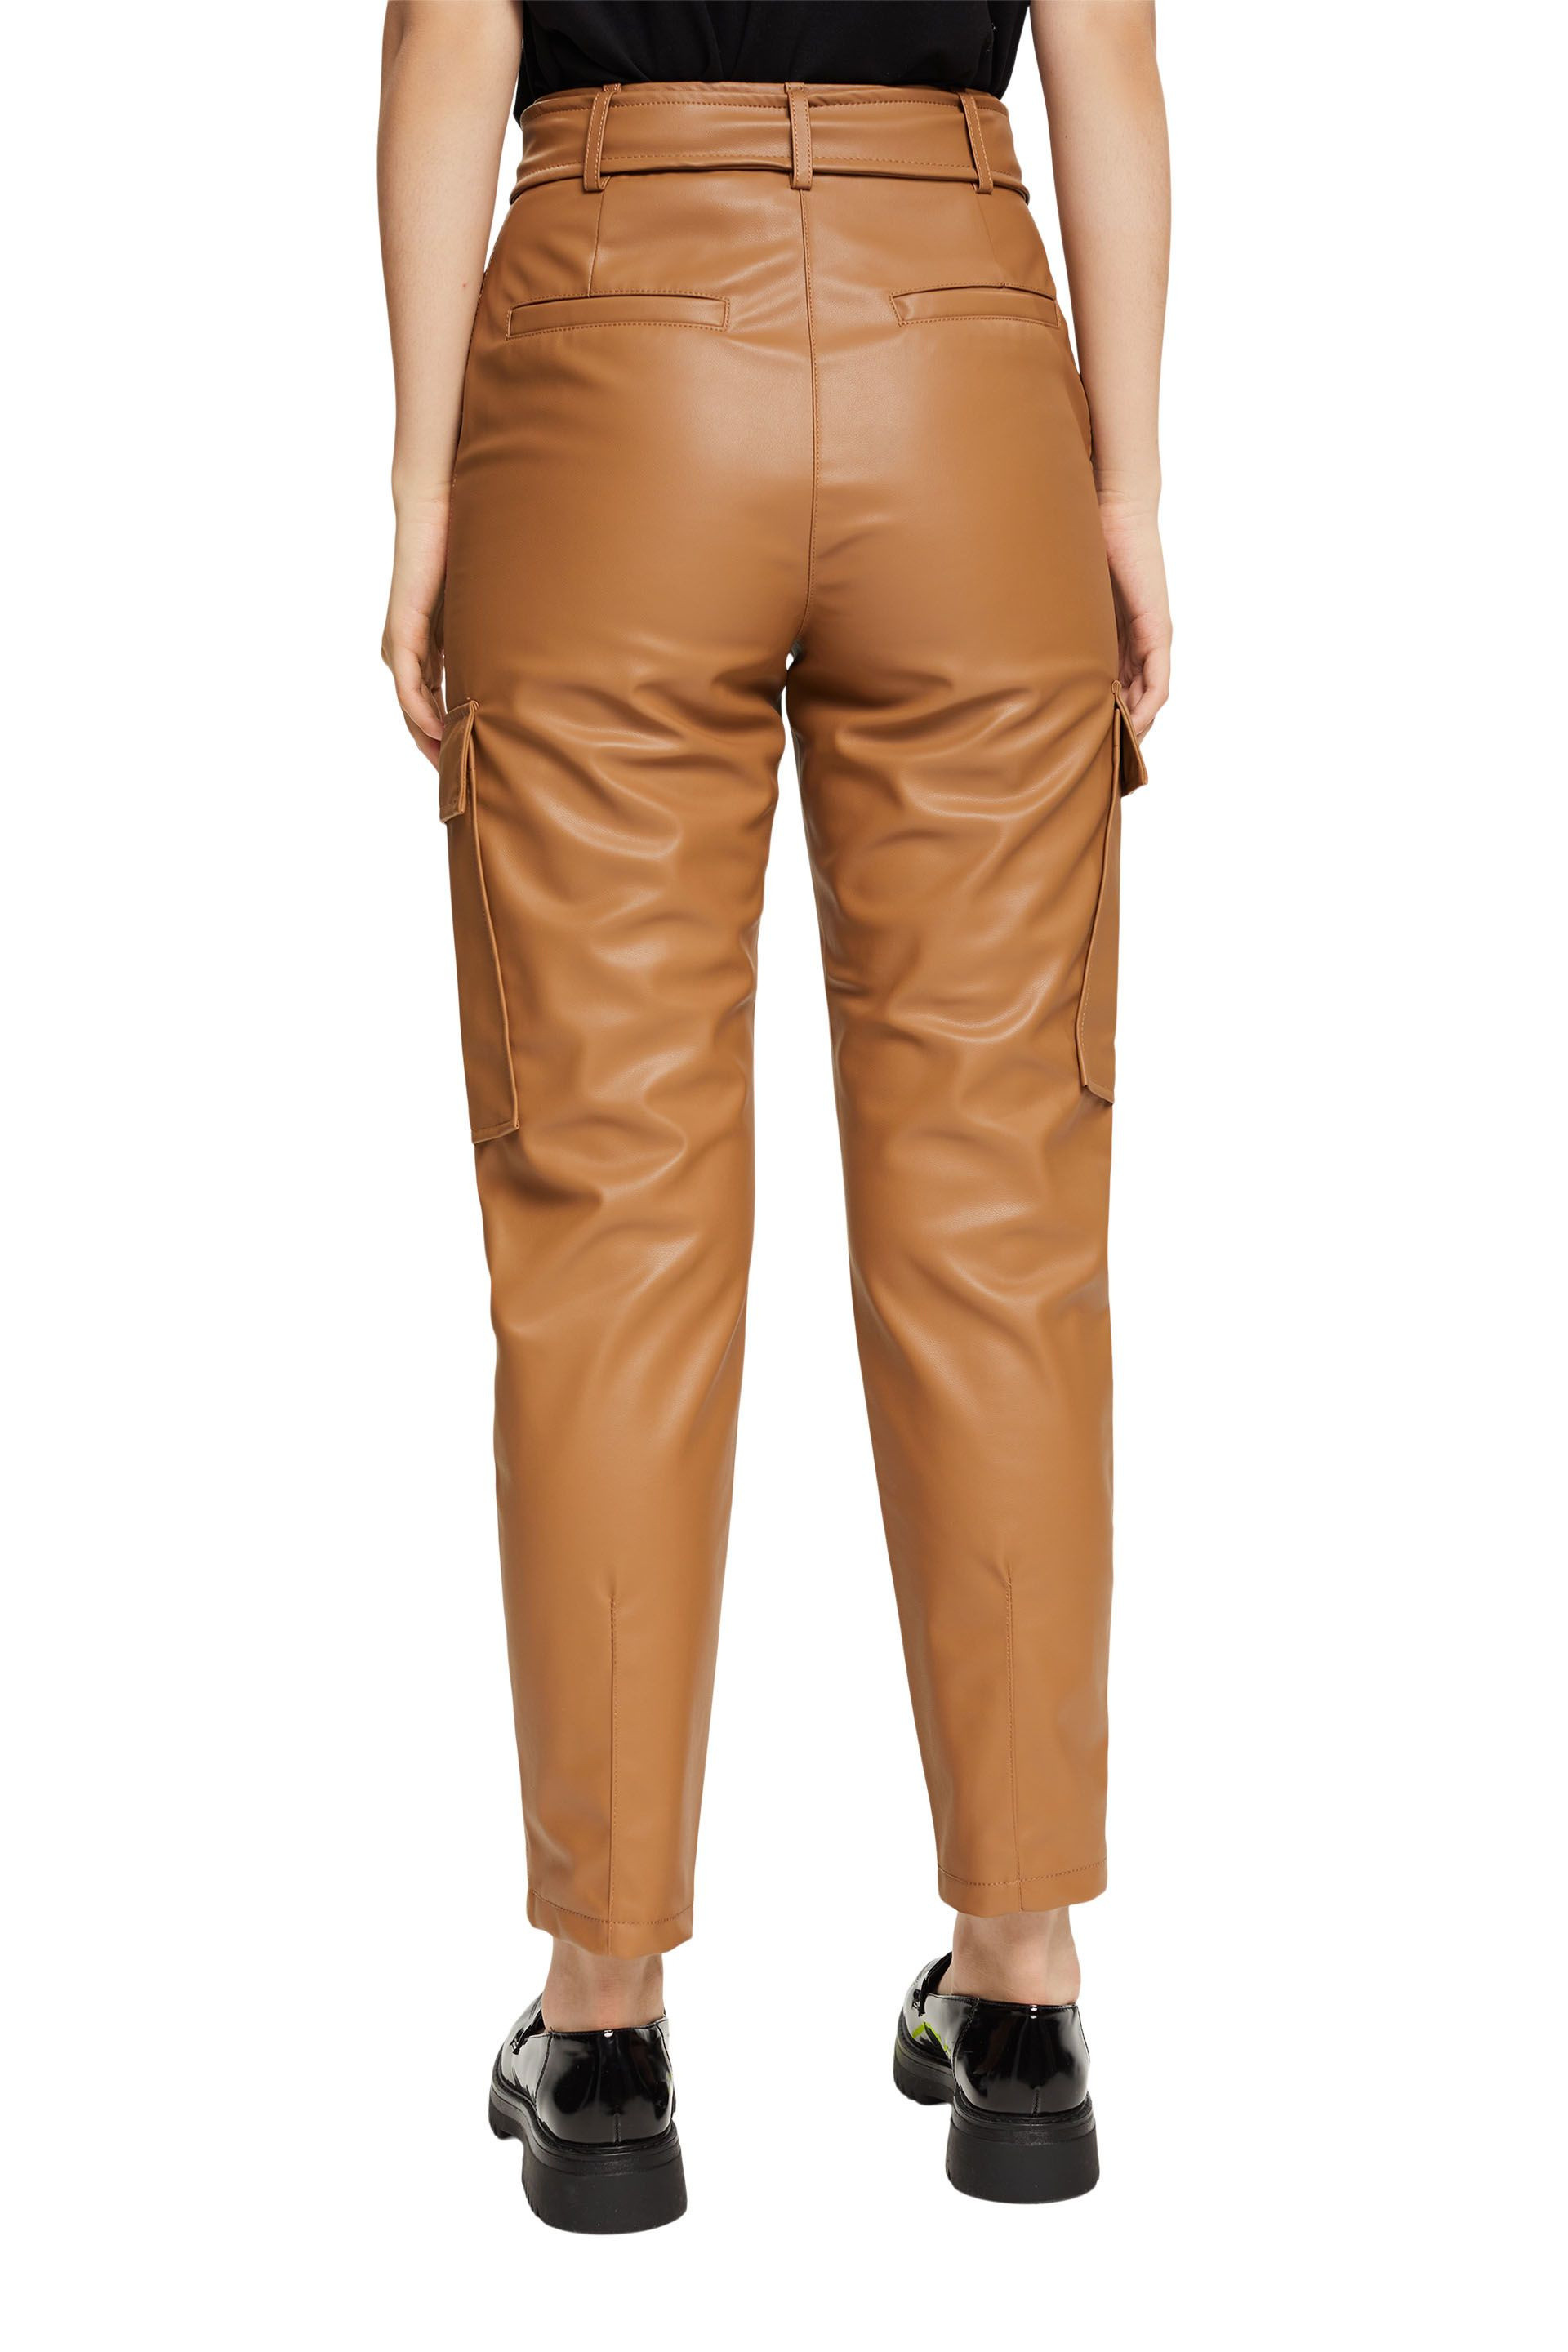 Faux leather trousers with belt, Light Brown, large image number 2